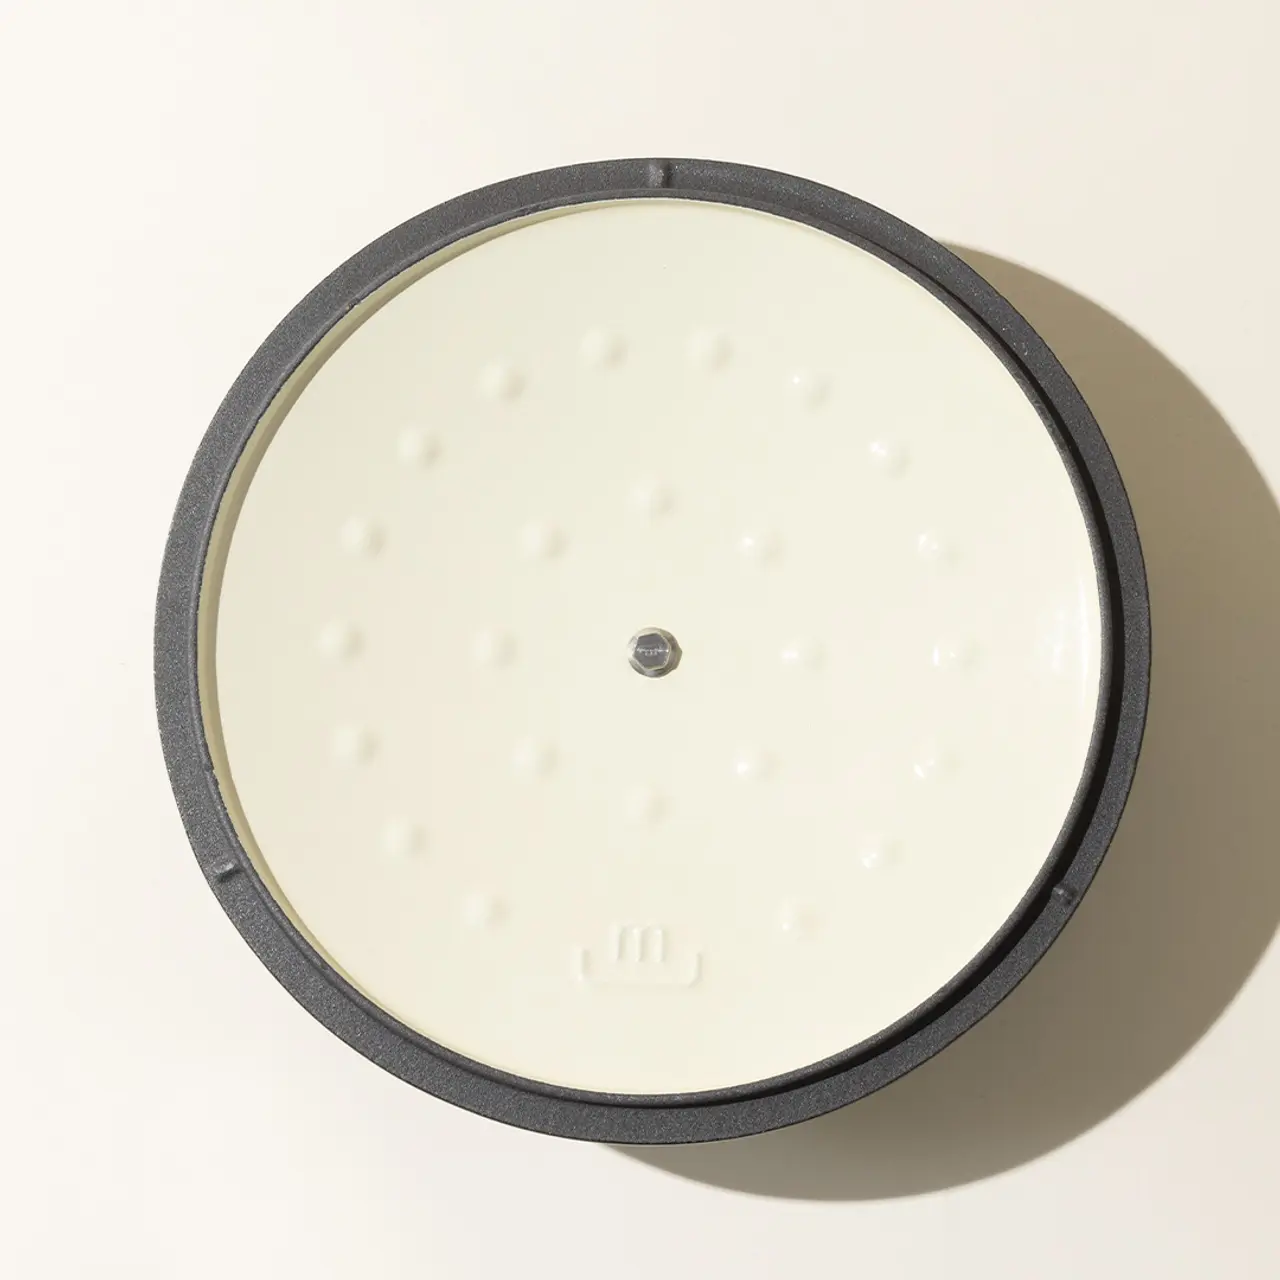 A top-down view of a white, round, braille-labeled device with a single, centered button and a dark border.